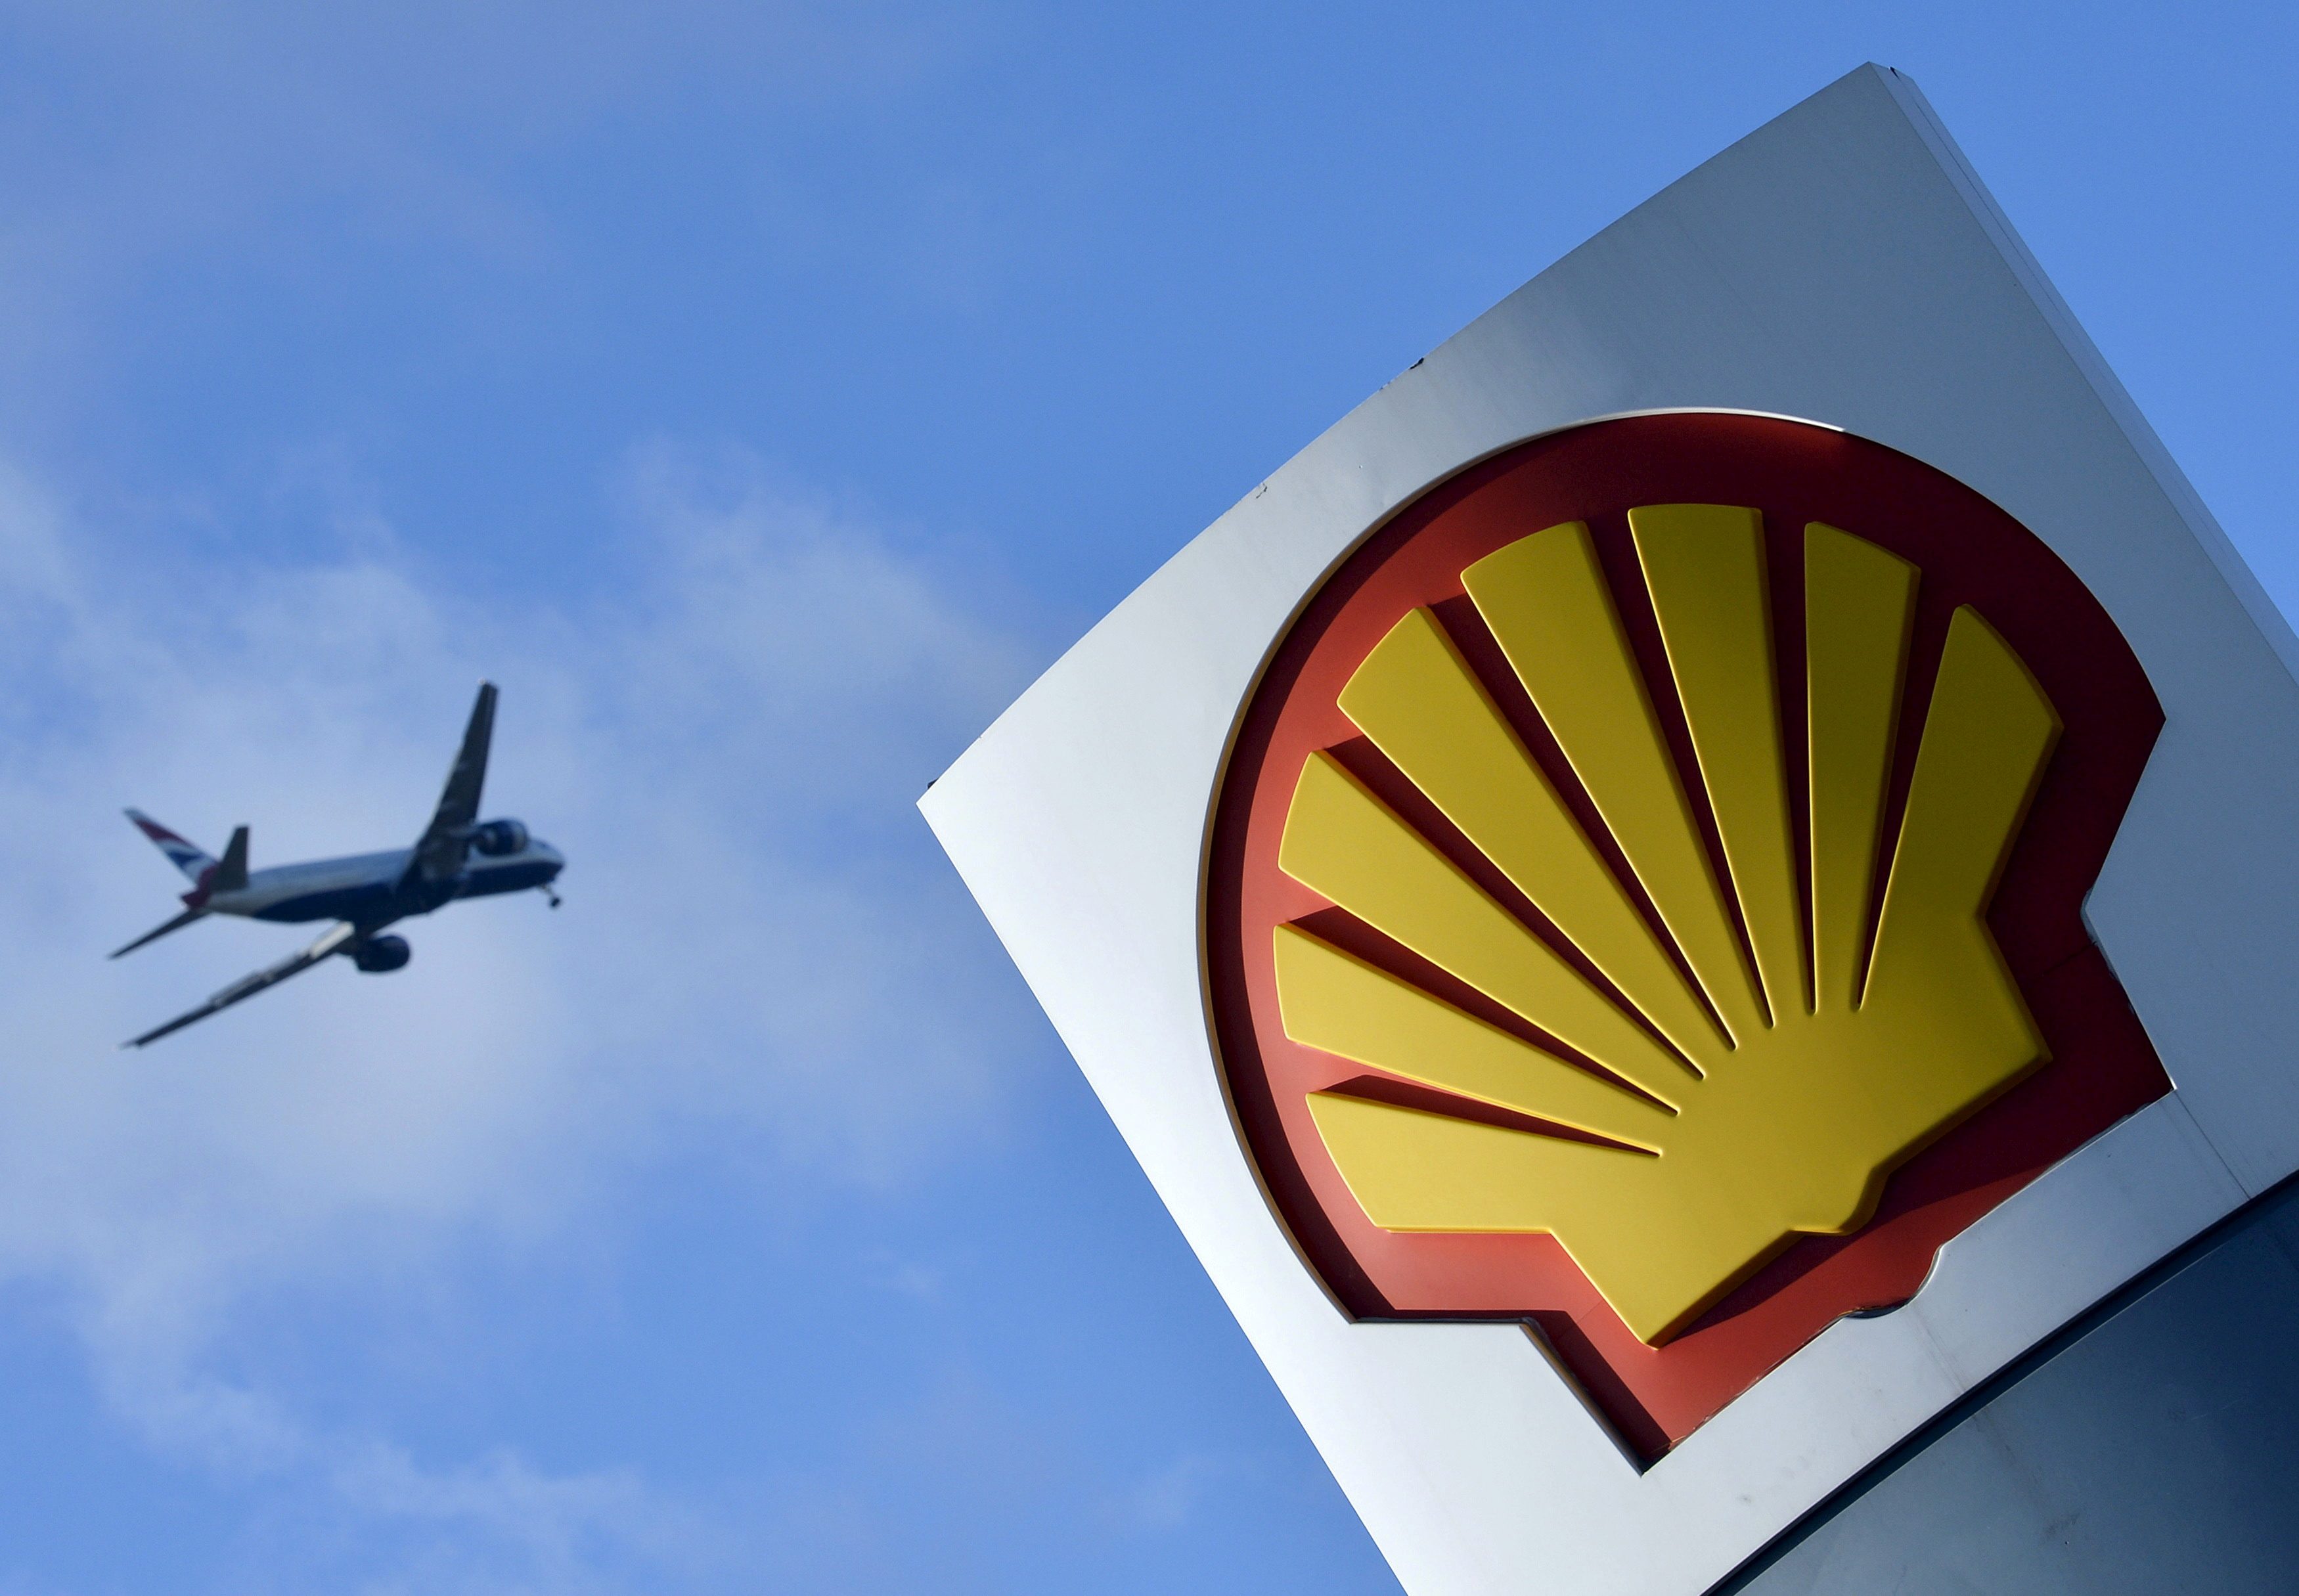 Oil giant Shell sets sights on sustainable aviation fuel takeoff